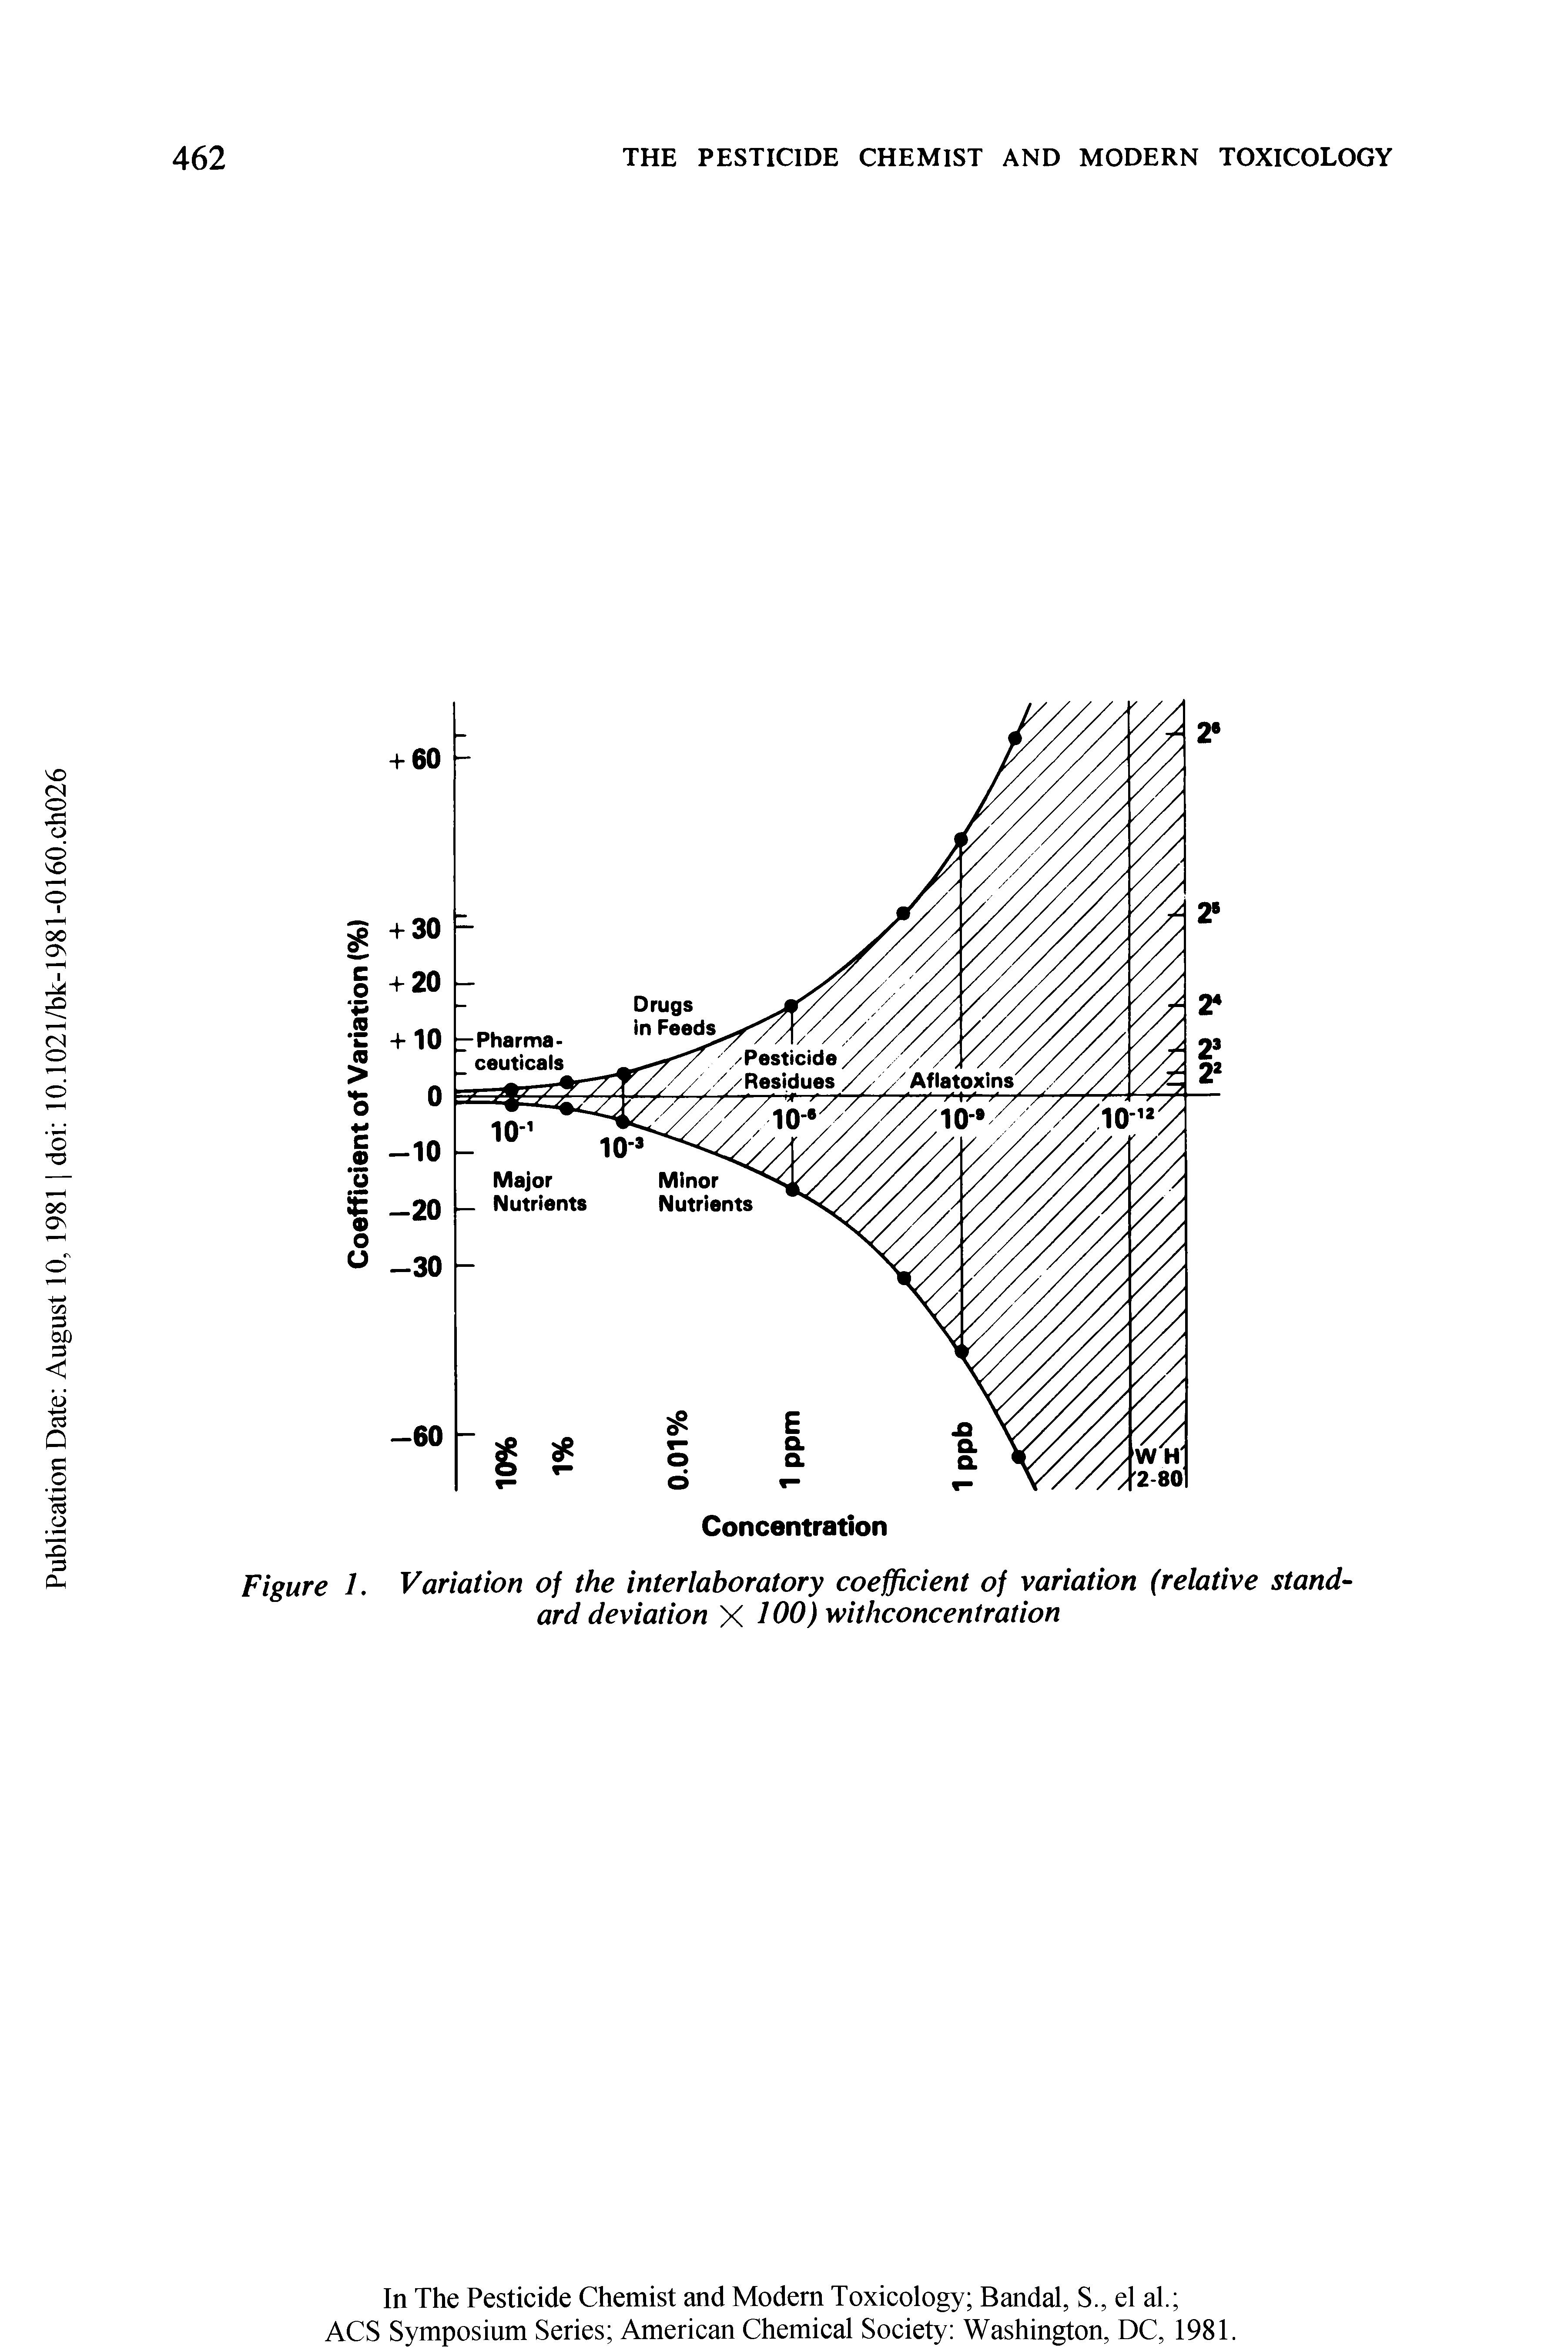 Figure 1. Variation of the interlaboratory coefficient of variation (relative standard deviation X 100)withconcentration...